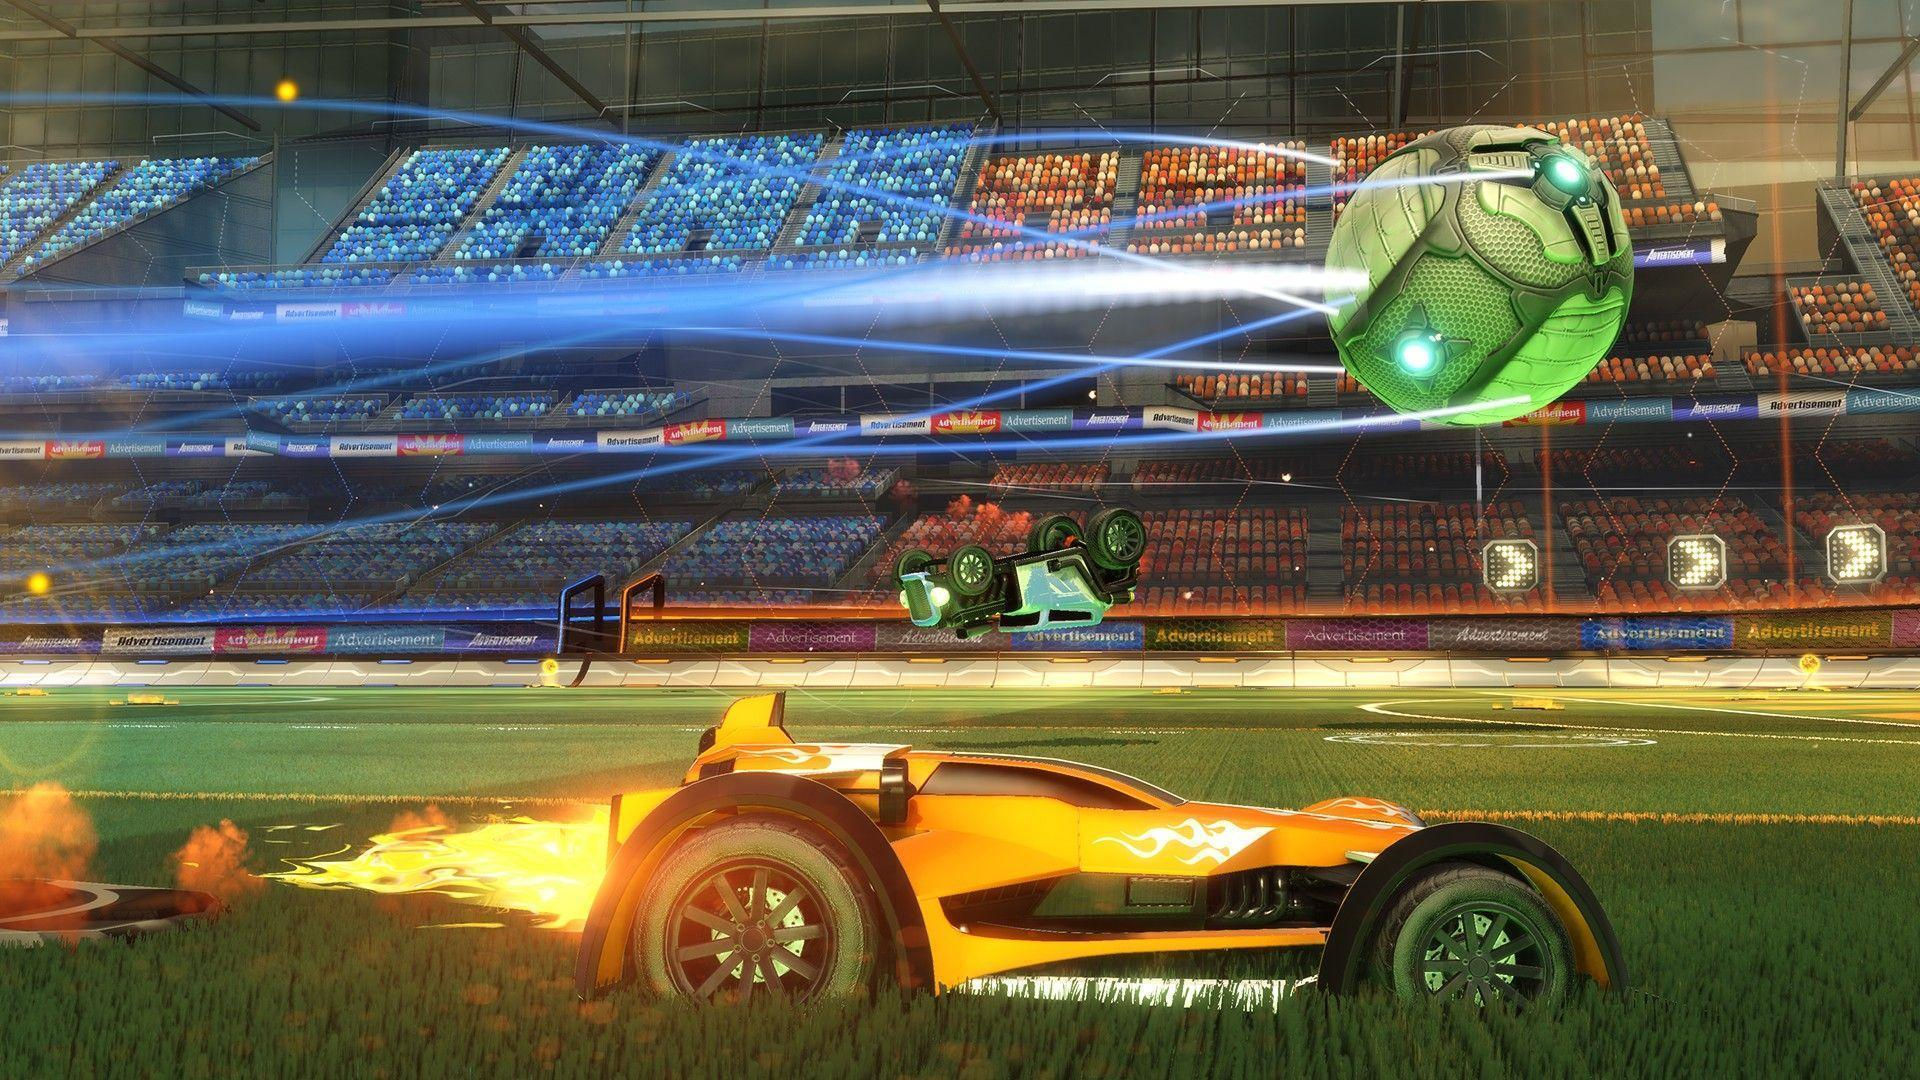 Rocket League wallpapers for mobile and PC | Pocket Tactics